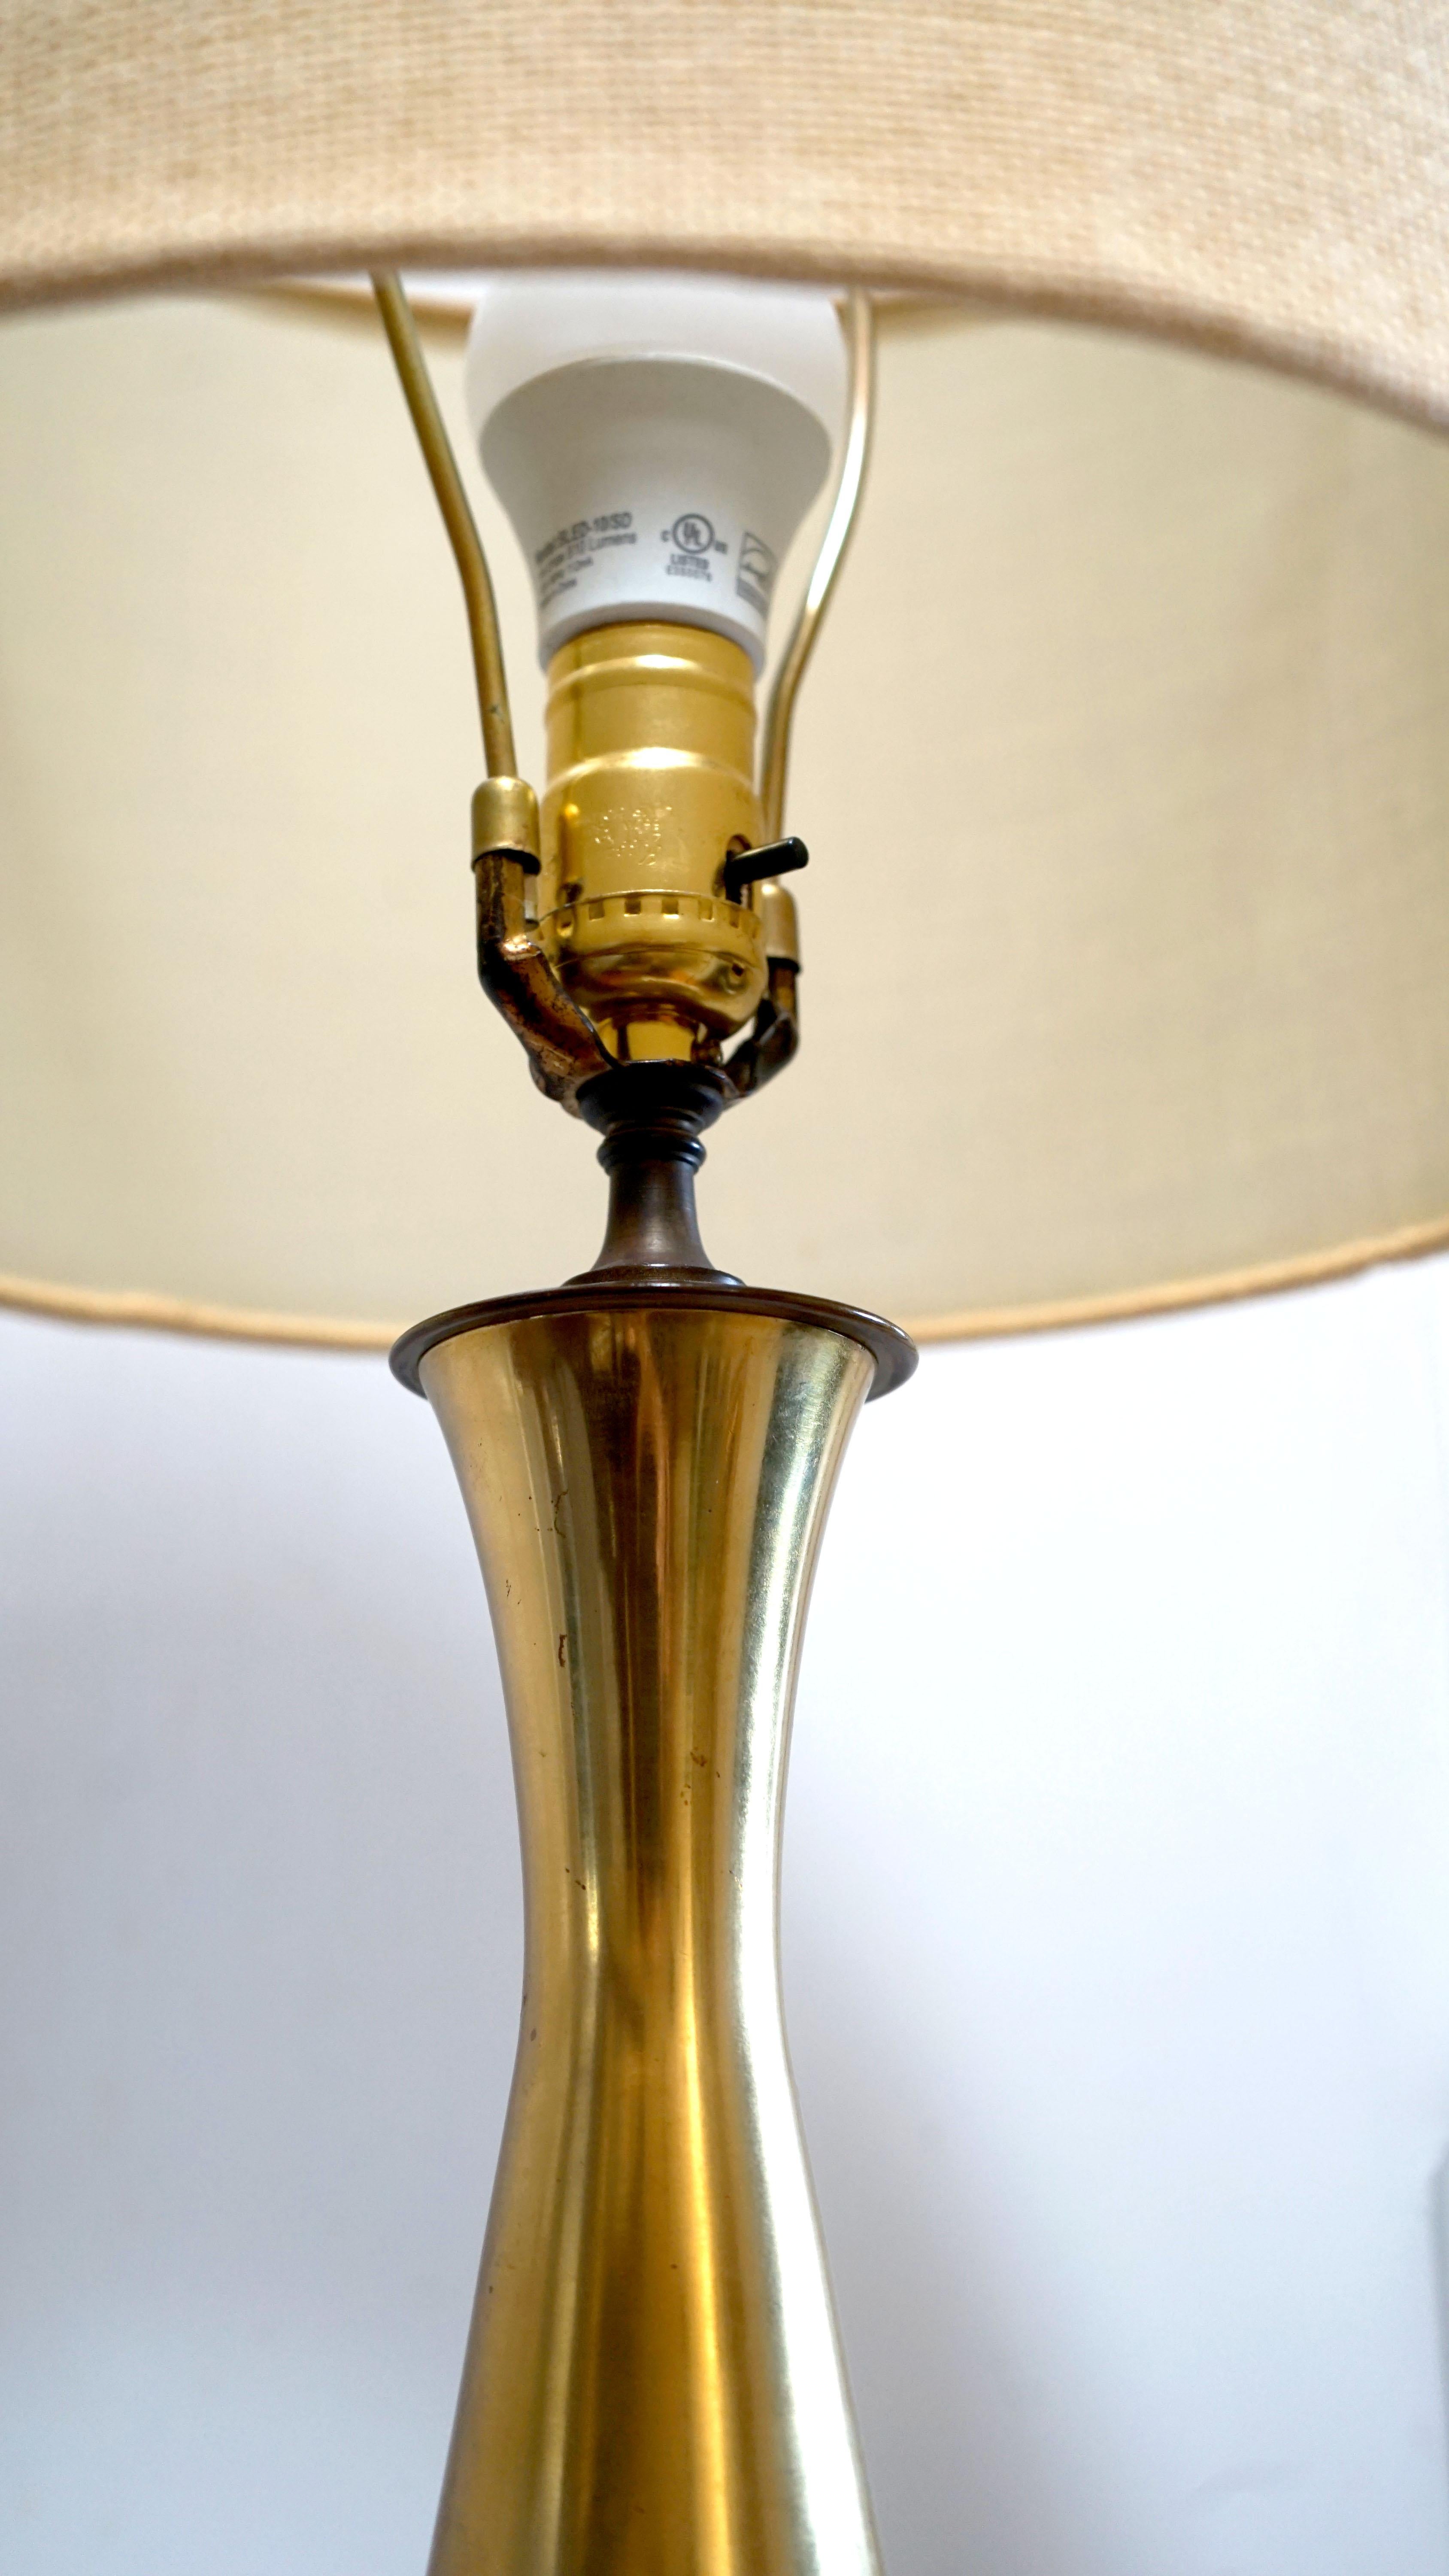 This is a beautifully designed Danish style vintage brass lamp on a walnut base. The style is Danish, probably mid 20th century from the 1950s made in Europe or the U.S.
The form is incredible--with its tear drop shape, flaring neck and pinched